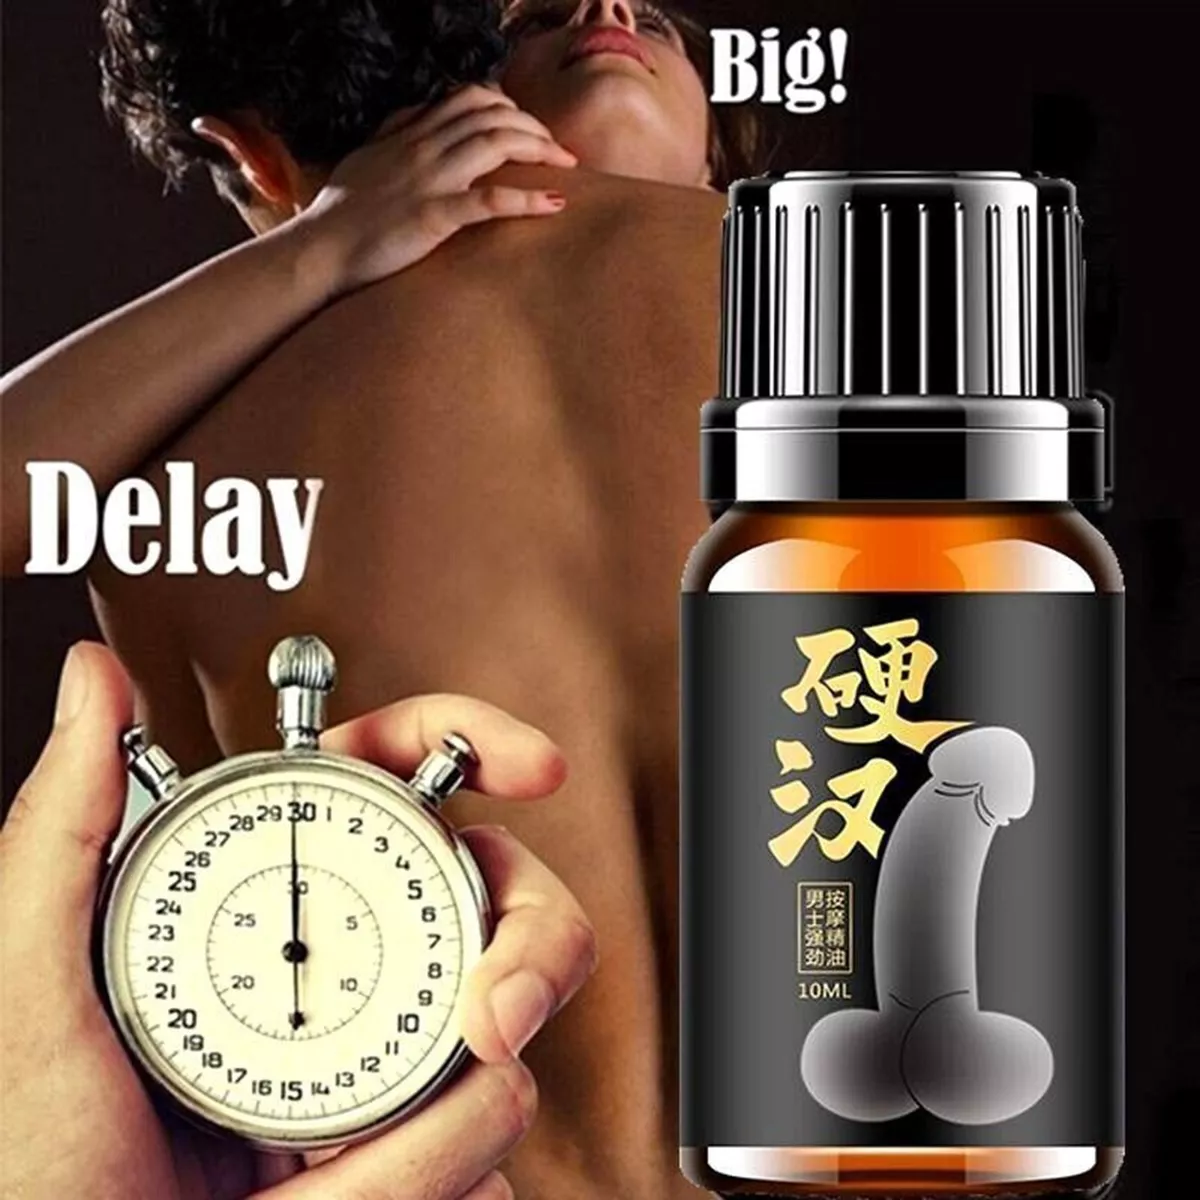 Male Natural Penis Enlarger Cream Bigger Thick Growth Faster XXL Enhancement eBay image